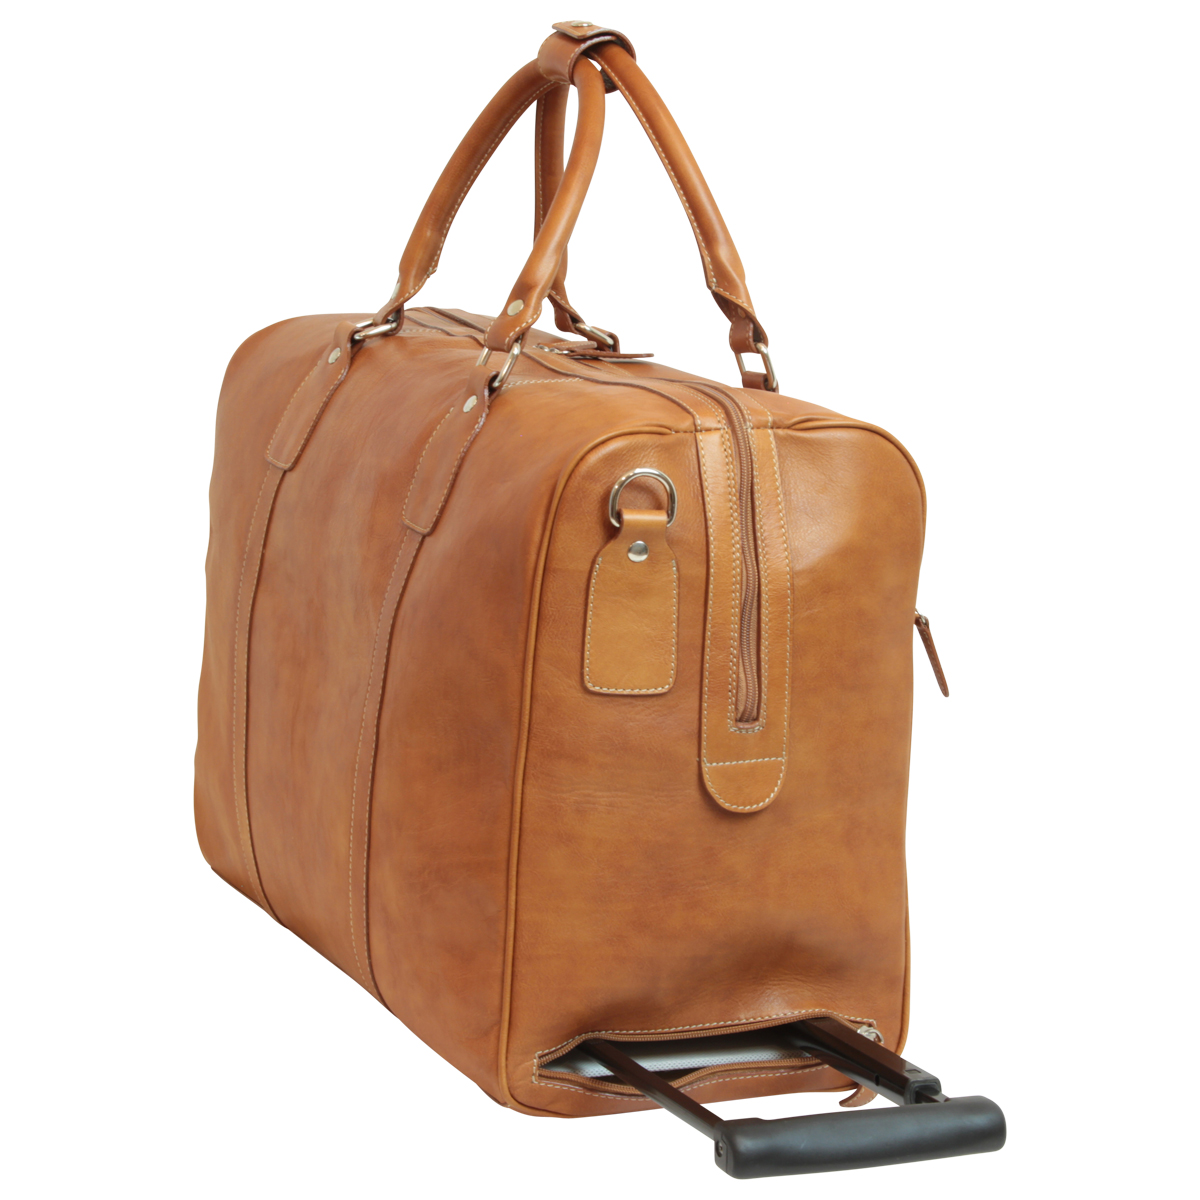 Oiled Calfskin leather duffel bag - Colonial Brown | 001561CO US | Old Angler Firenze